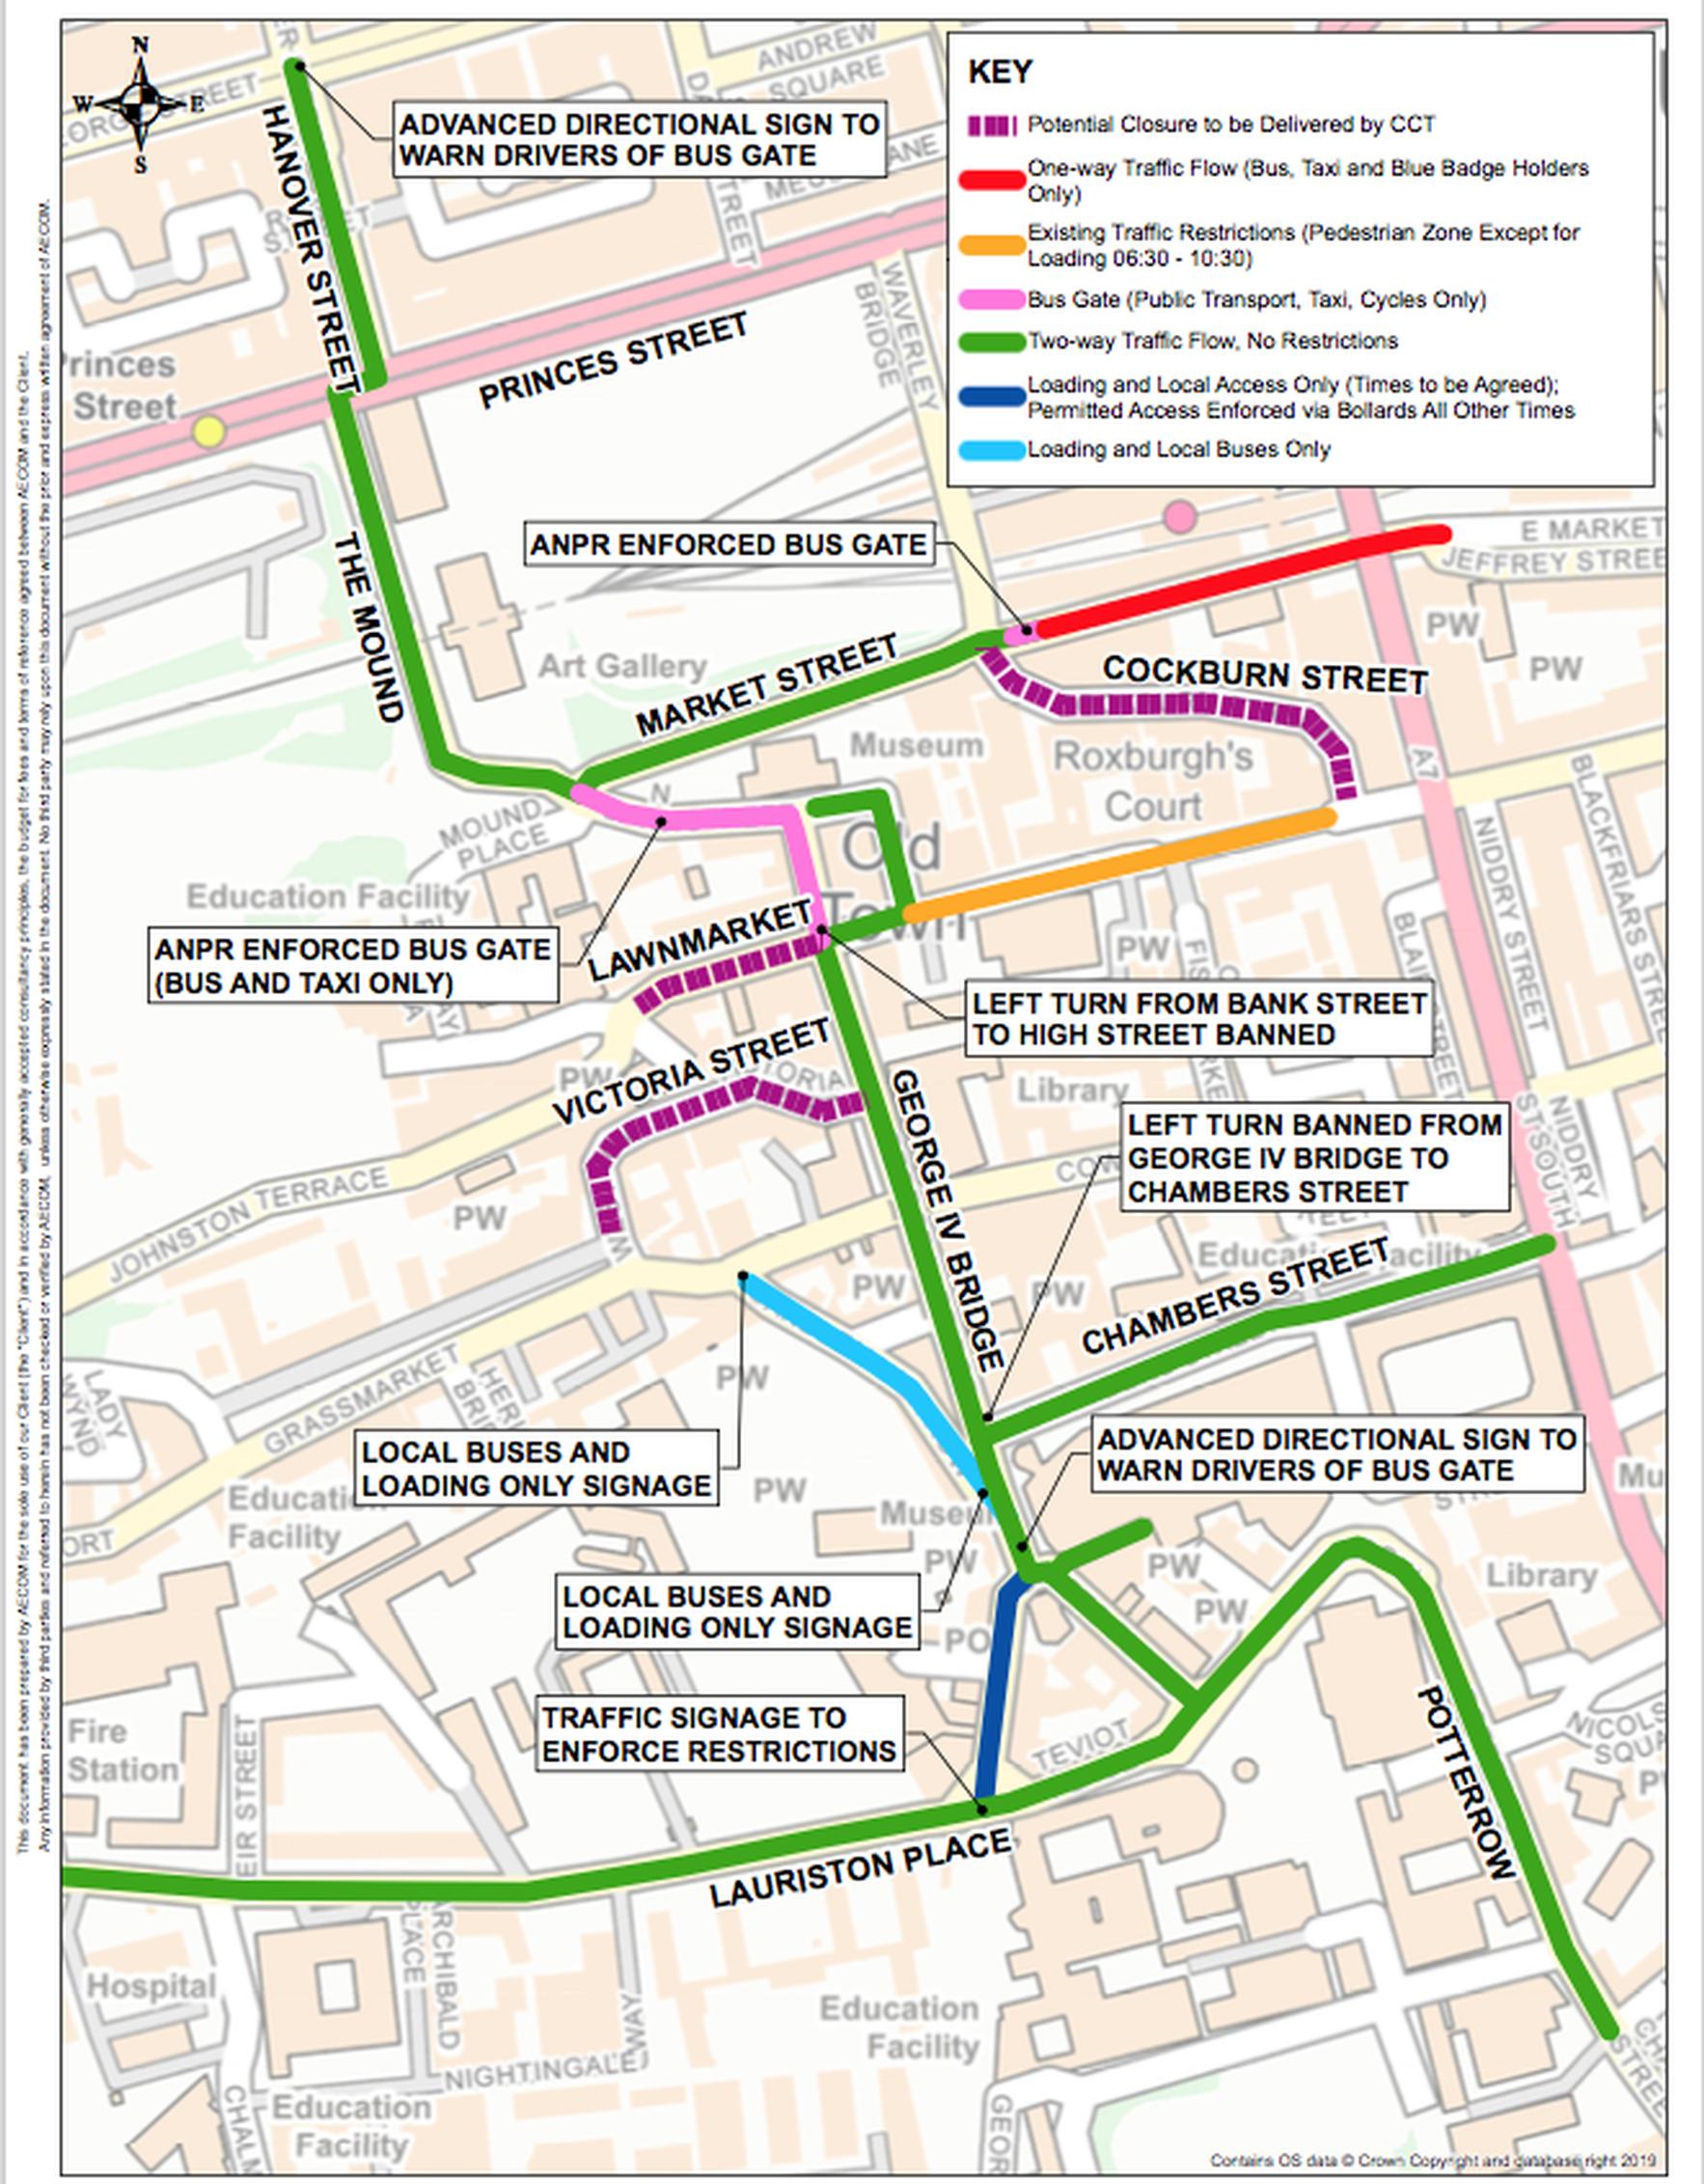 The corridor, showing some of the proposed changes (image reproduced courtesy of City of Edinburgh Council and AECOM)